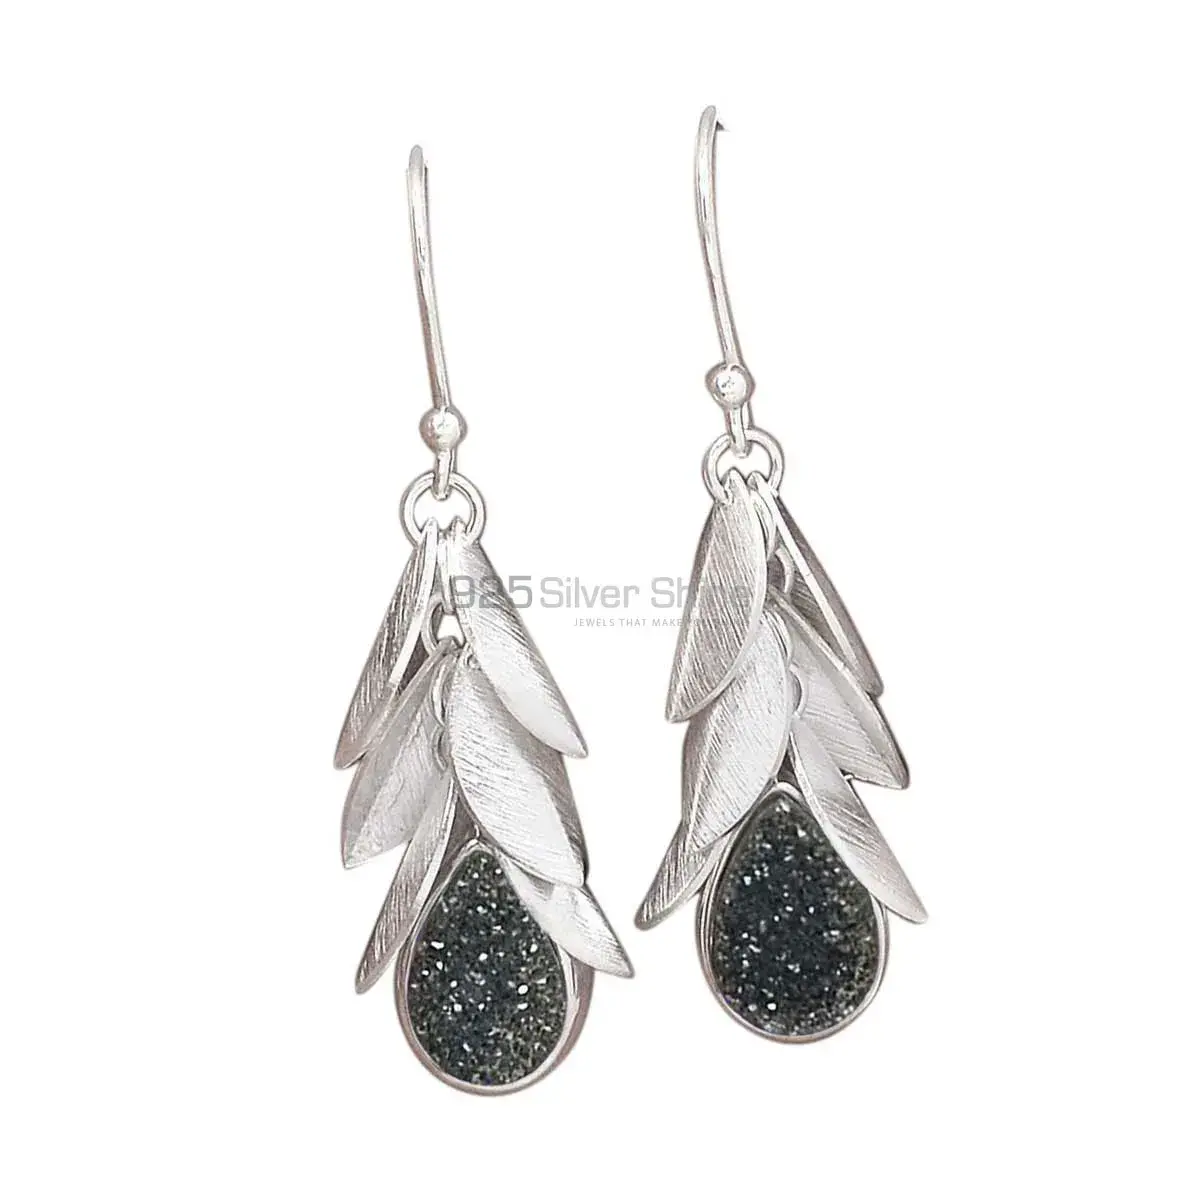 Natural Druzy Gemstone Earrings Manufacturer In 925 Sterling Silver Jewelry 925SE3006